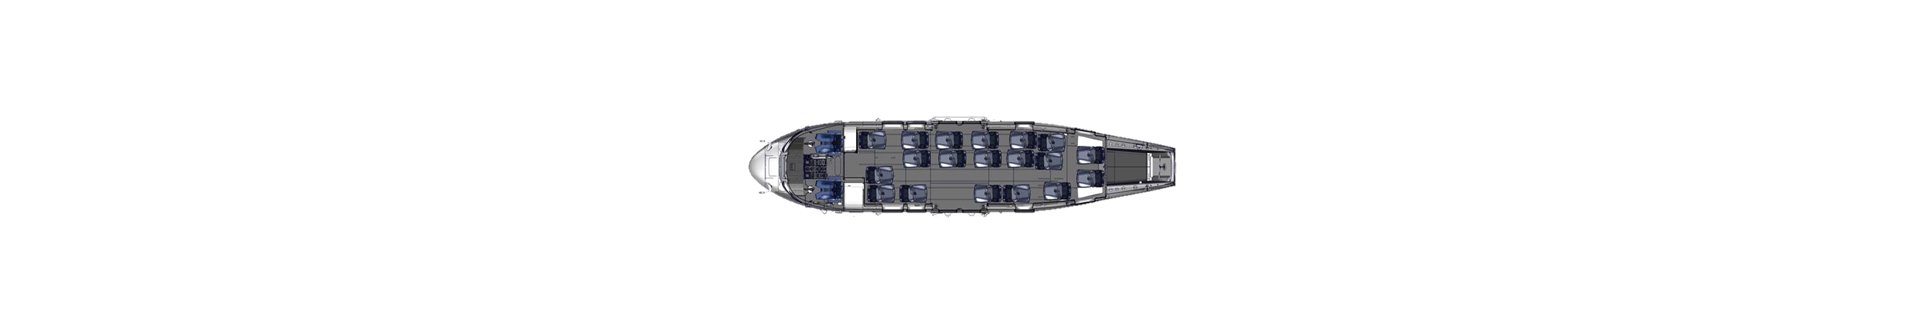 Diagram of an Airbus H225 helicopter cabin with 19 seats for passenger and offshore transport. 